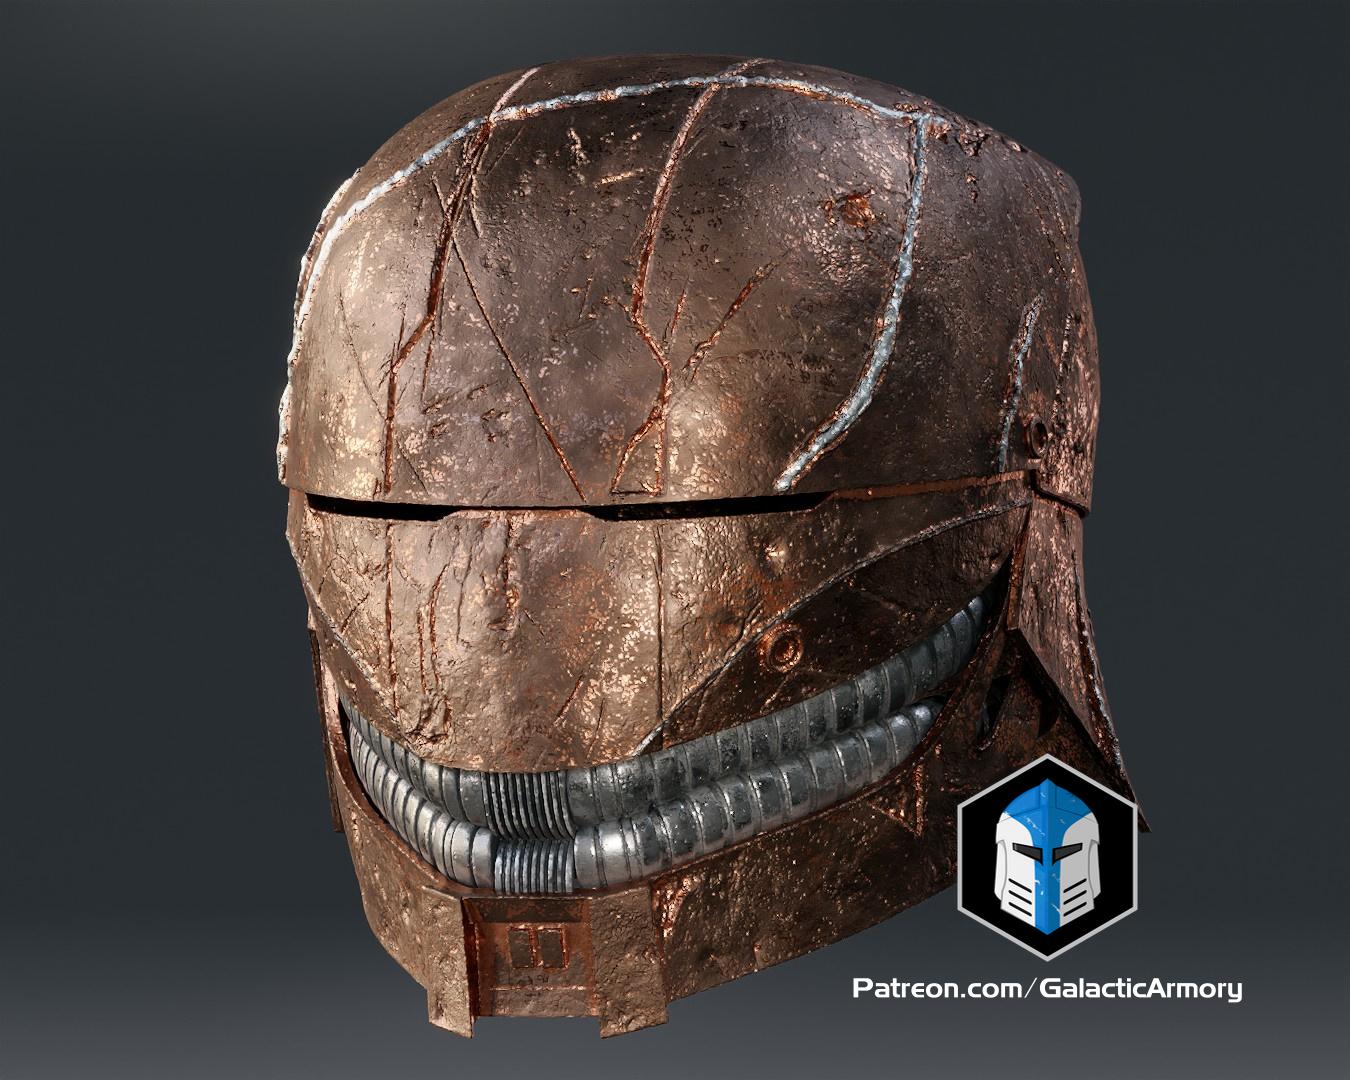 [New Files!] The Acolyte Stranger helmet has been added to the Specialist rewards!